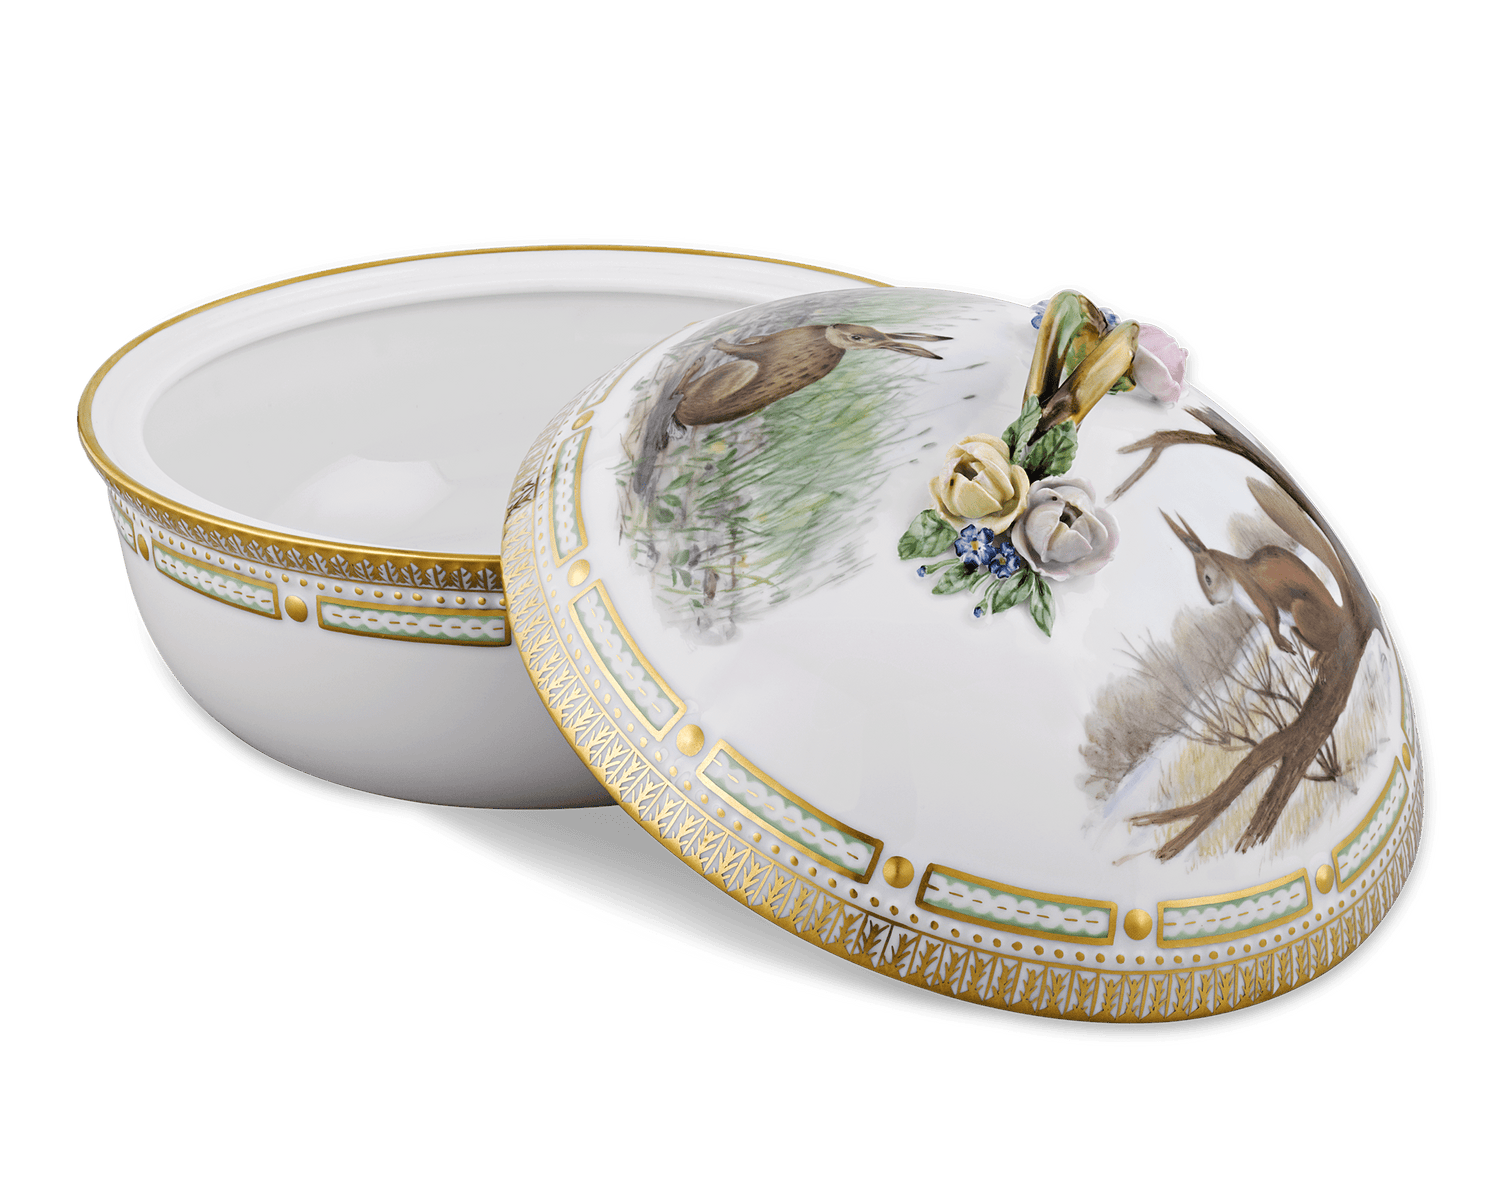 Flora Danica Game Series Covered Vegetable Dish